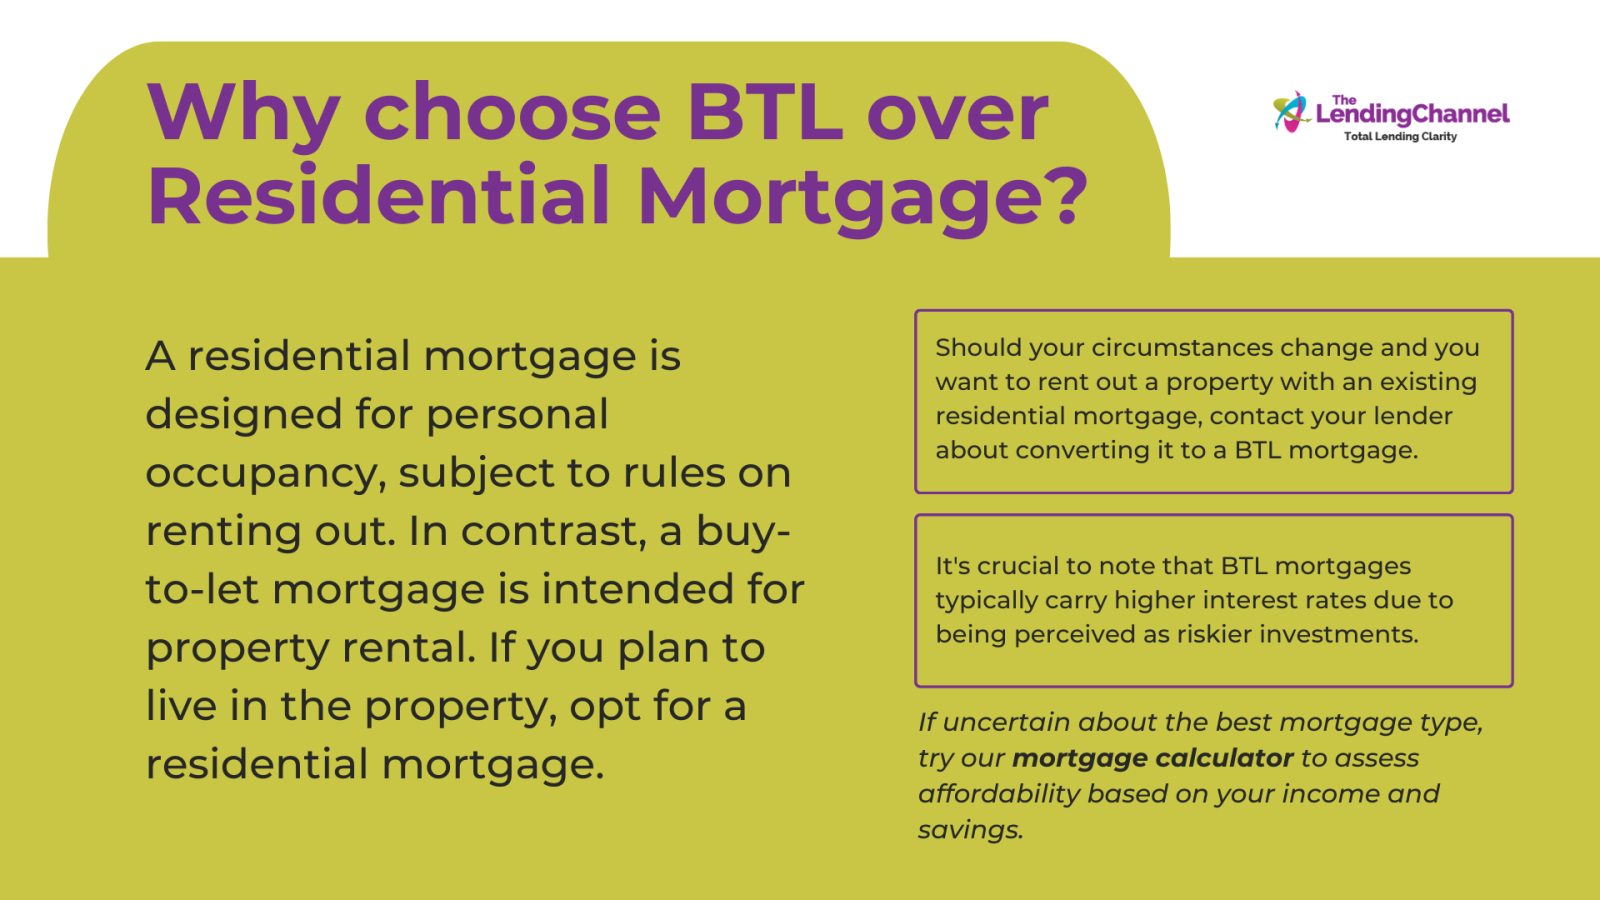 How Many Buy-To-Let Mortgages Can I Have?